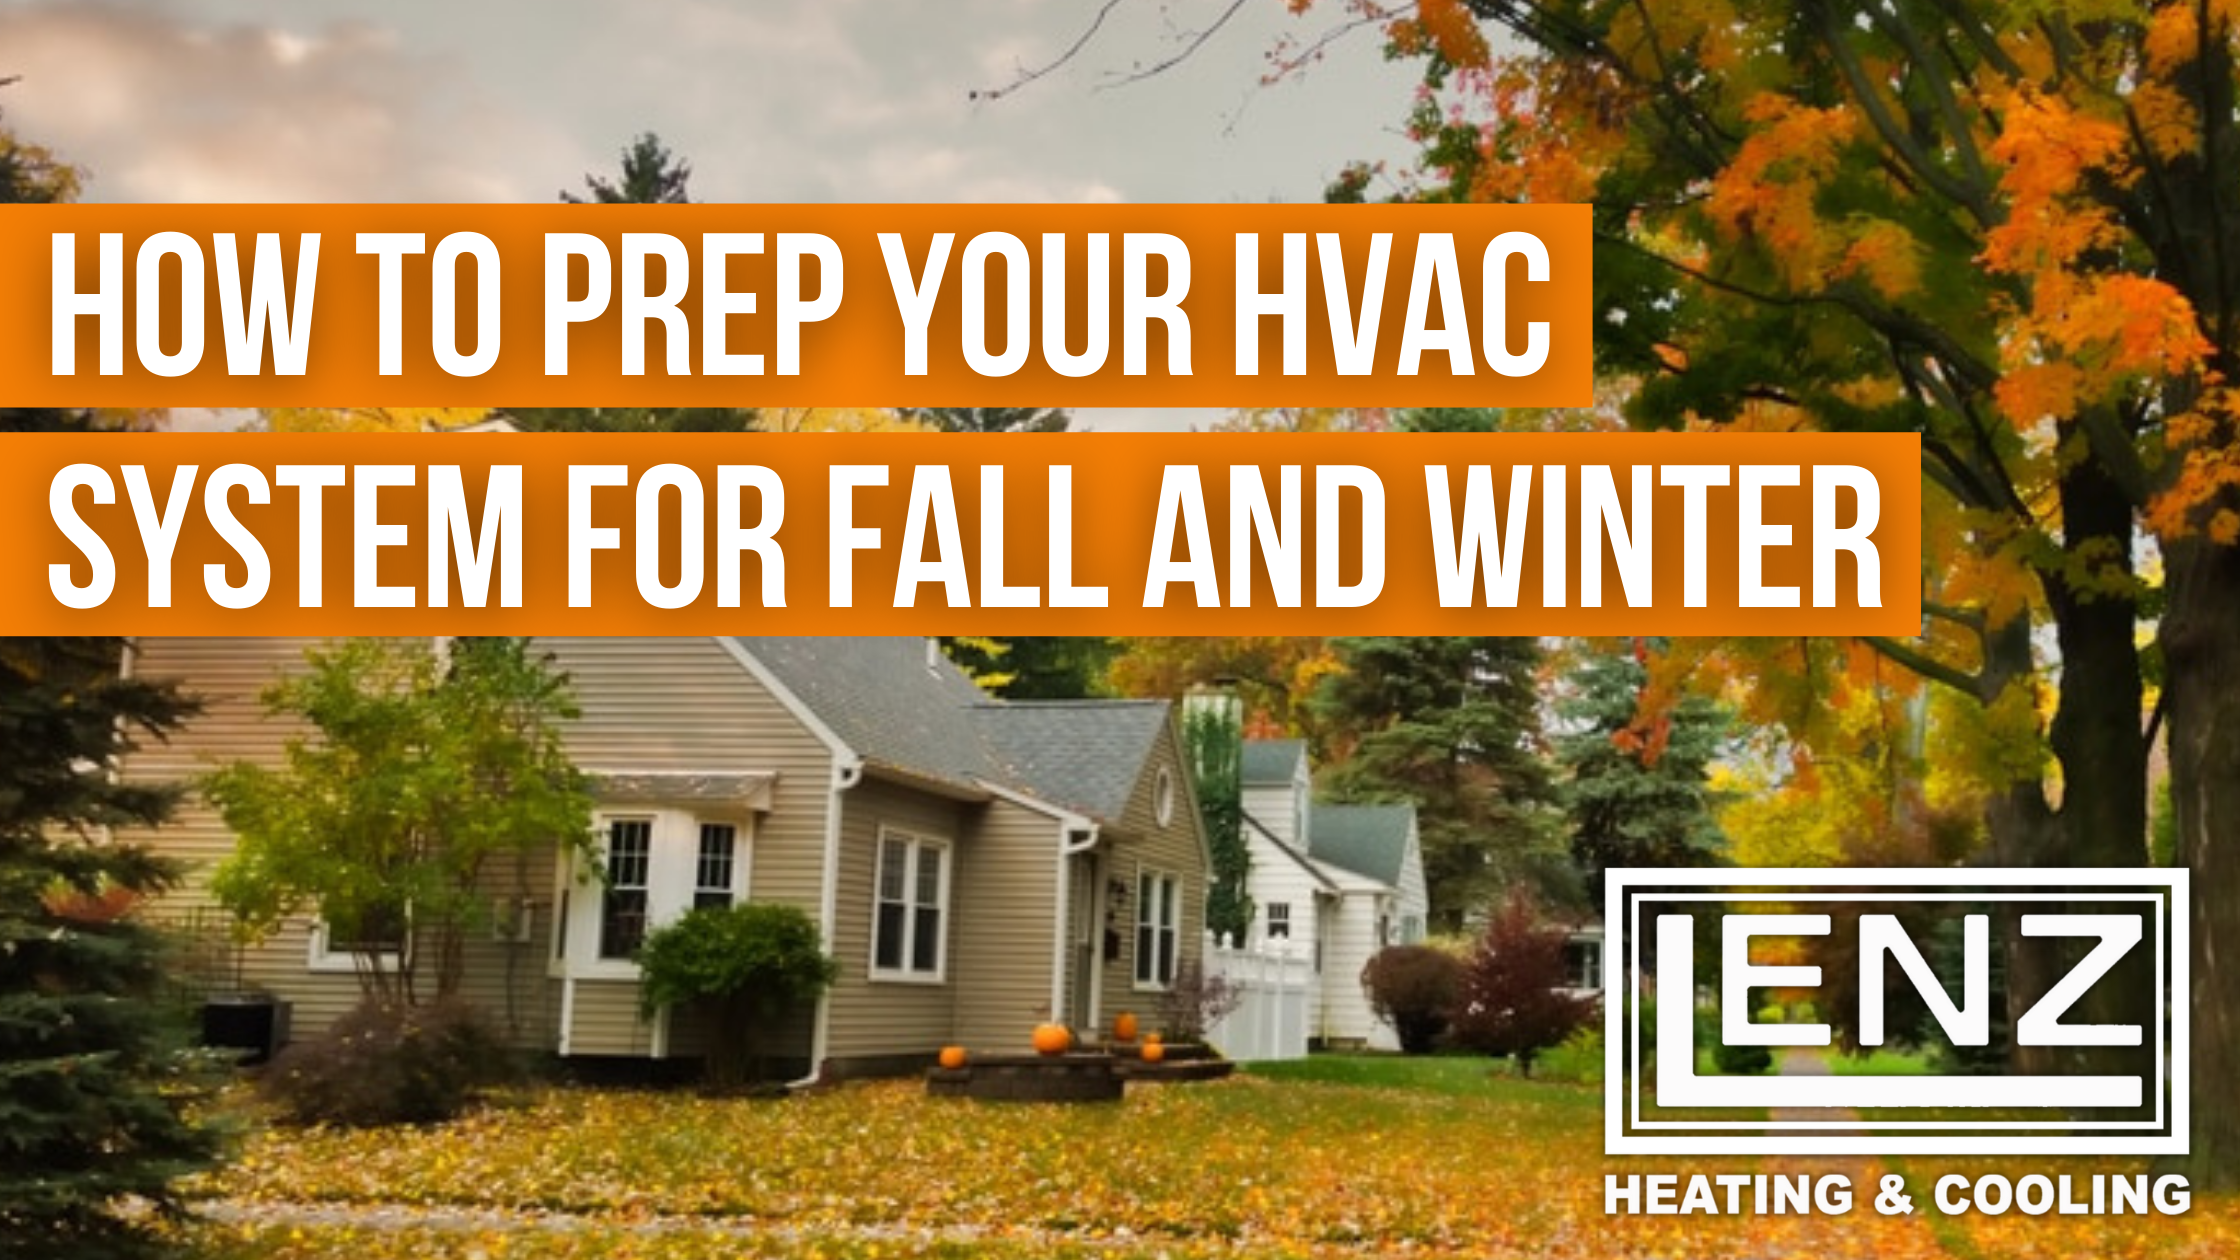 How to Prep Your HVAC System for Fall and Winter, prepping HVAC system, prep HVAC system for fall, prep HVAC system for winter, prepare HVAC unit